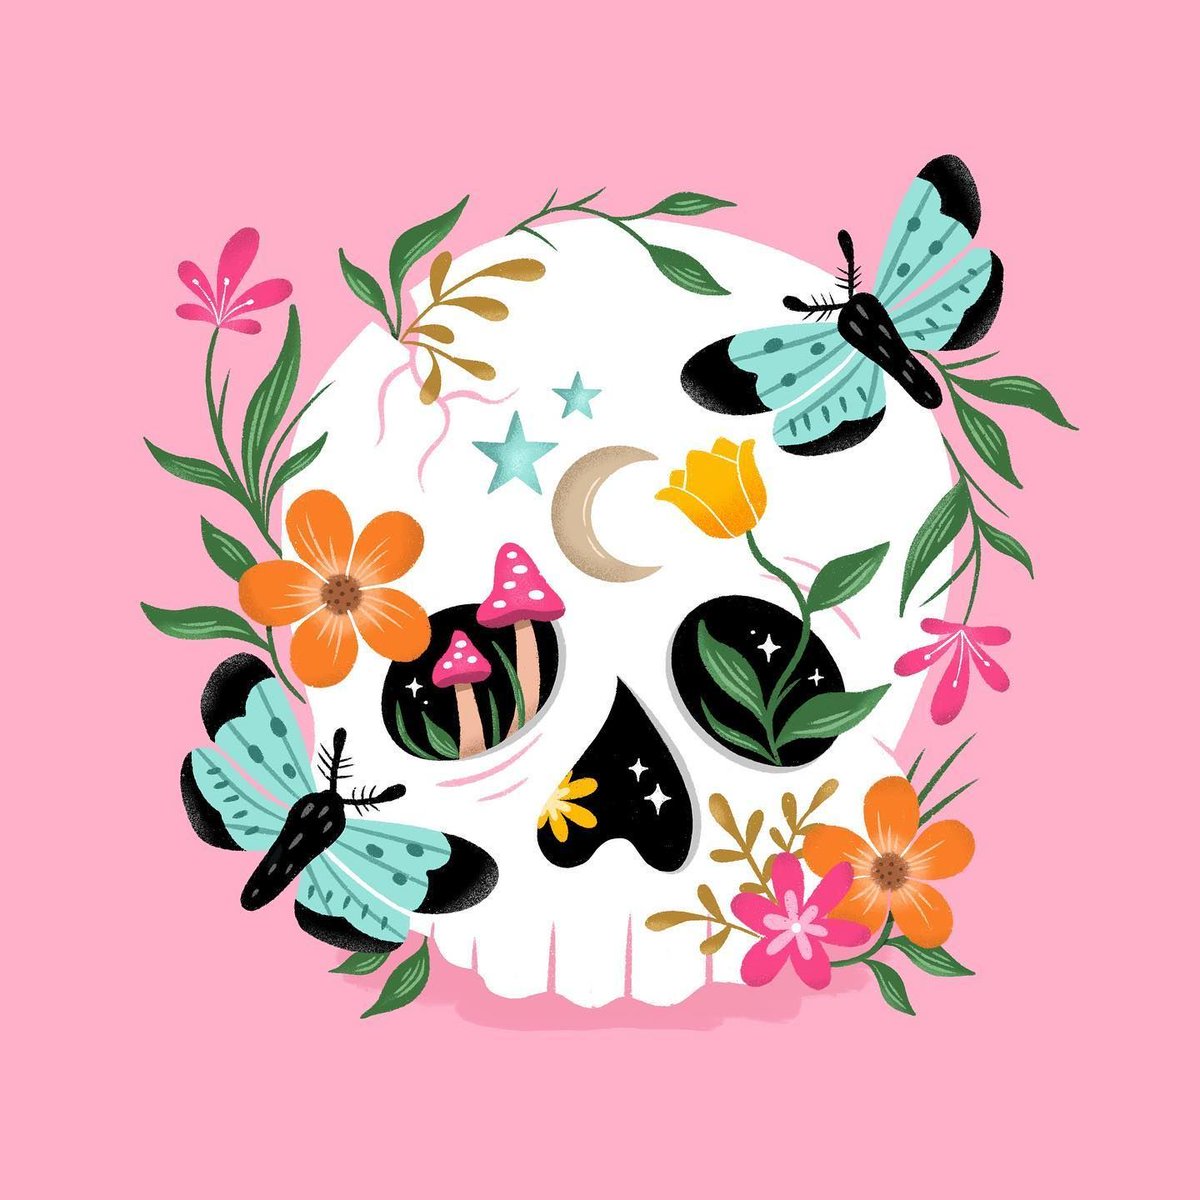 Living for these spooky cute vibes right now! 👻 🥰 Love this illustration from @ashlee.illustrates (on IG) #spookyseason #floralskull #flowerskull #cutehalloween #womenofillustration #ladieswhodraw #halloweenillustration #skulldrawing #halloweenskull #floralillustration